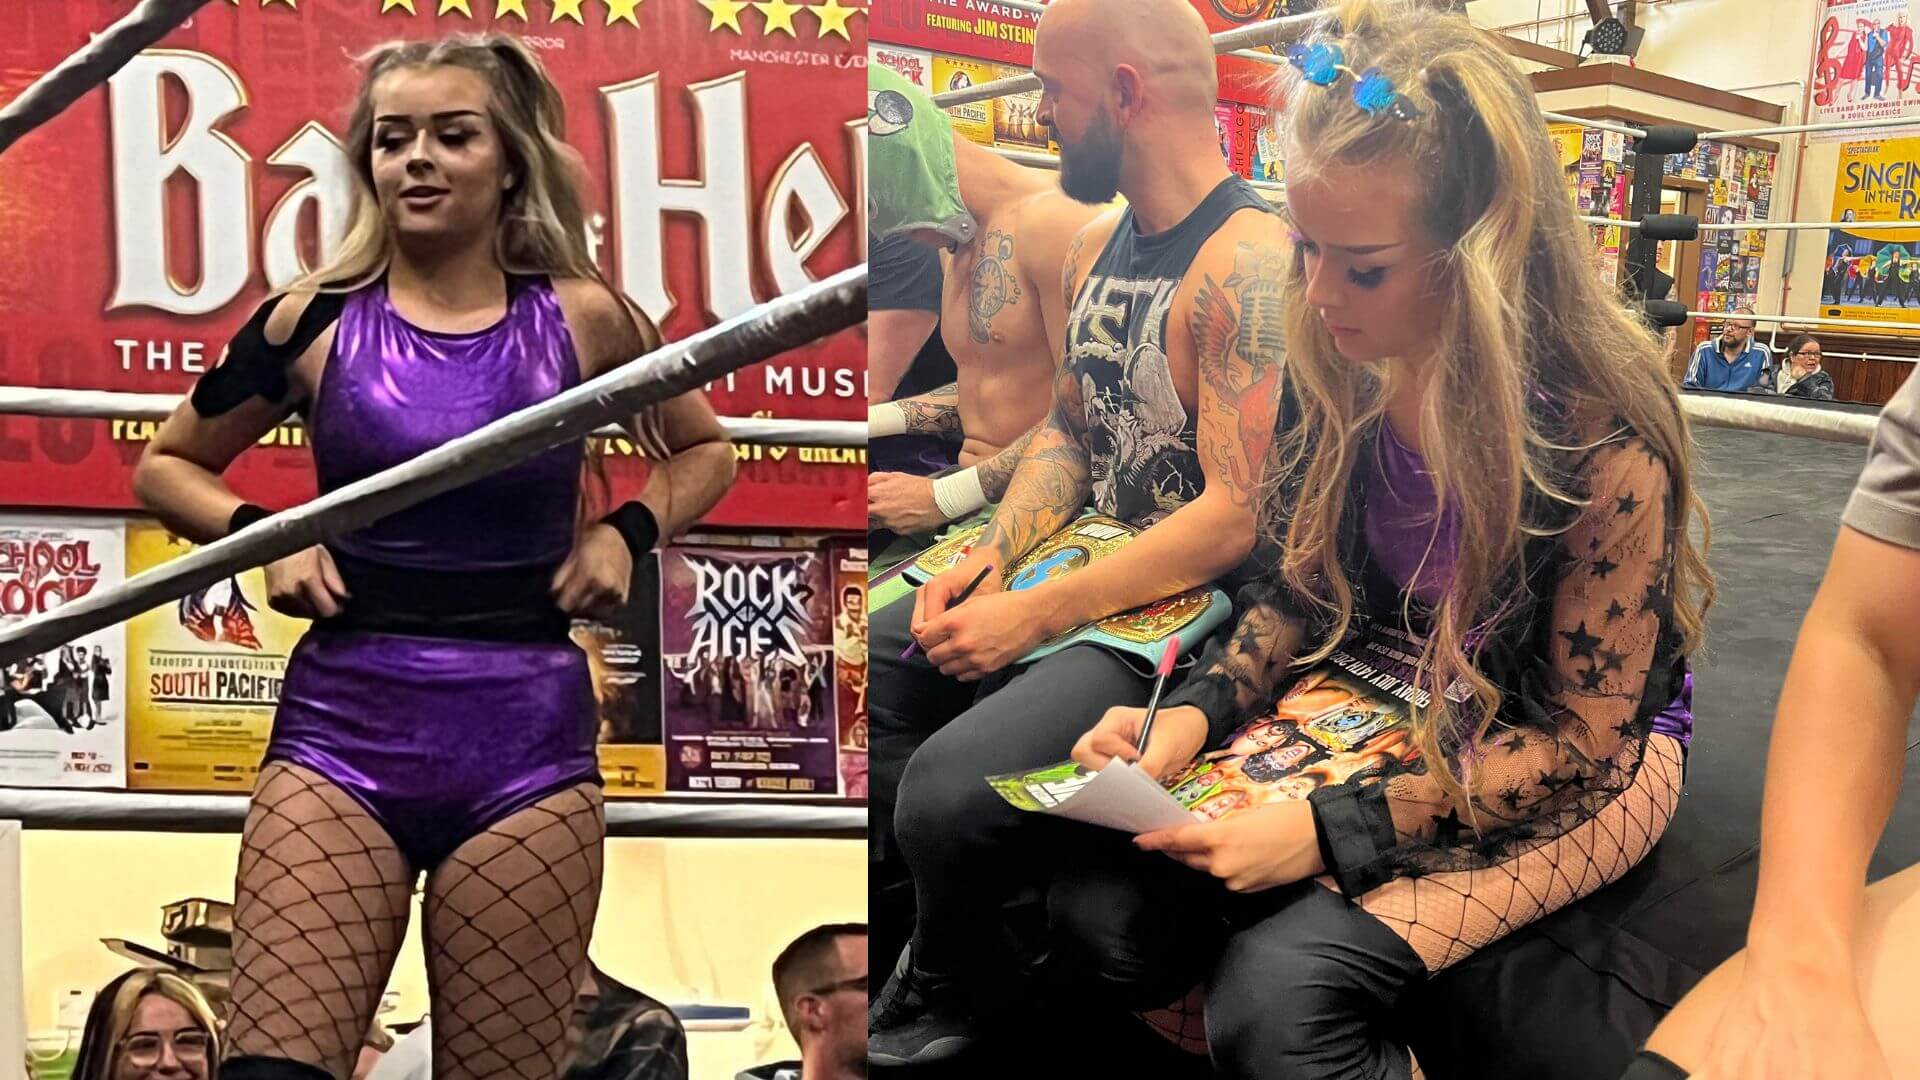 Two photos of a female wrester- one in the ring and one signing autographs